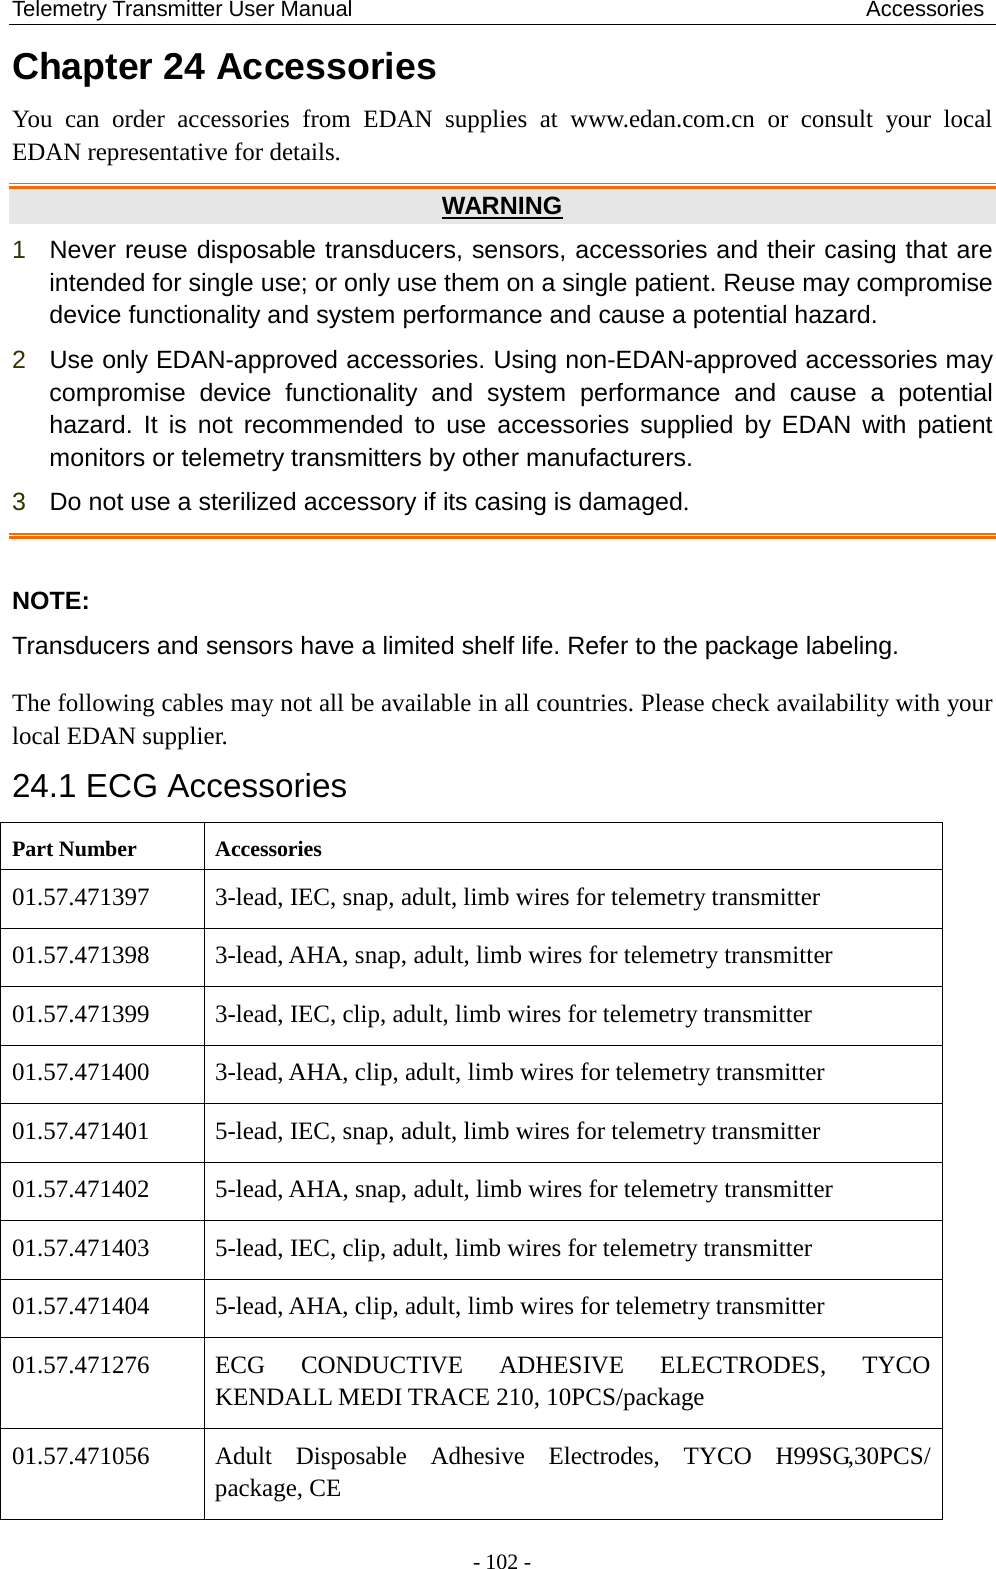 Telemetry Transmitter User Manual                                               Accessories Chapter 24 Accessories   You can order accessories from EDAN supplies at www.edan.com.cn or consult your local EDAN representative for details.   WARNING 1  Never reuse disposable transducers, sensors, accessories and their casing that are intended for single use; or only use them on a single patient. Reuse may compromise device functionality and system performance and cause a potential hazard. 2  Use only EDAN-approved accessories. Using non-EDAN-approved accessories may compromise device functionality and system performance and cause a potential hazard. It is not recommended to use accessories supplied by EDAN with patient monitors or telemetry transmitters by other manufacturers. 3  Do not use a sterilized accessory if its casing is damaged.  NOTE: Transducers and sensors have a limited shelf life. Refer to the package labeling. The following cables may not all be available in all countries. Please check availability with your local EDAN supplier. 24.1 ECG Accessories Part Number Accessories 01.57.471397  3-lead, IEC, snap, adult, limb wires for telemetry transmitter 01.57.471398  3-lead, AHA, snap, adult, limb wires for telemetry transmitter 01.57.471399  3-lead, IEC, clip, adult, limb wires for telemetry transmitter 01.57.471400  3-lead, AHA, clip, adult, limb wires for telemetry transmitter 01.57.471401  5-lead, IEC, snap, adult, limb wires for telemetry transmitter 01.57.471402  5-lead, AHA, snap, adult, limb wires for telemetry transmitter 01.57.471403  5-lead, IEC, clip, adult, limb wires for telemetry transmitter 01.57.471404  5-lead, AHA, clip, adult, limb wires for telemetry transmitter 01.57.471276 ECG CONDUCTIVE ADHESIVE ELECTRODES, TYCO KENDALL MEDI TRACE 210, 10PCS/package 01.57.471056  Adult Disposable Adhesive Electrodes, TYCO H99SG,30PCS/ package, CE - 102 - 